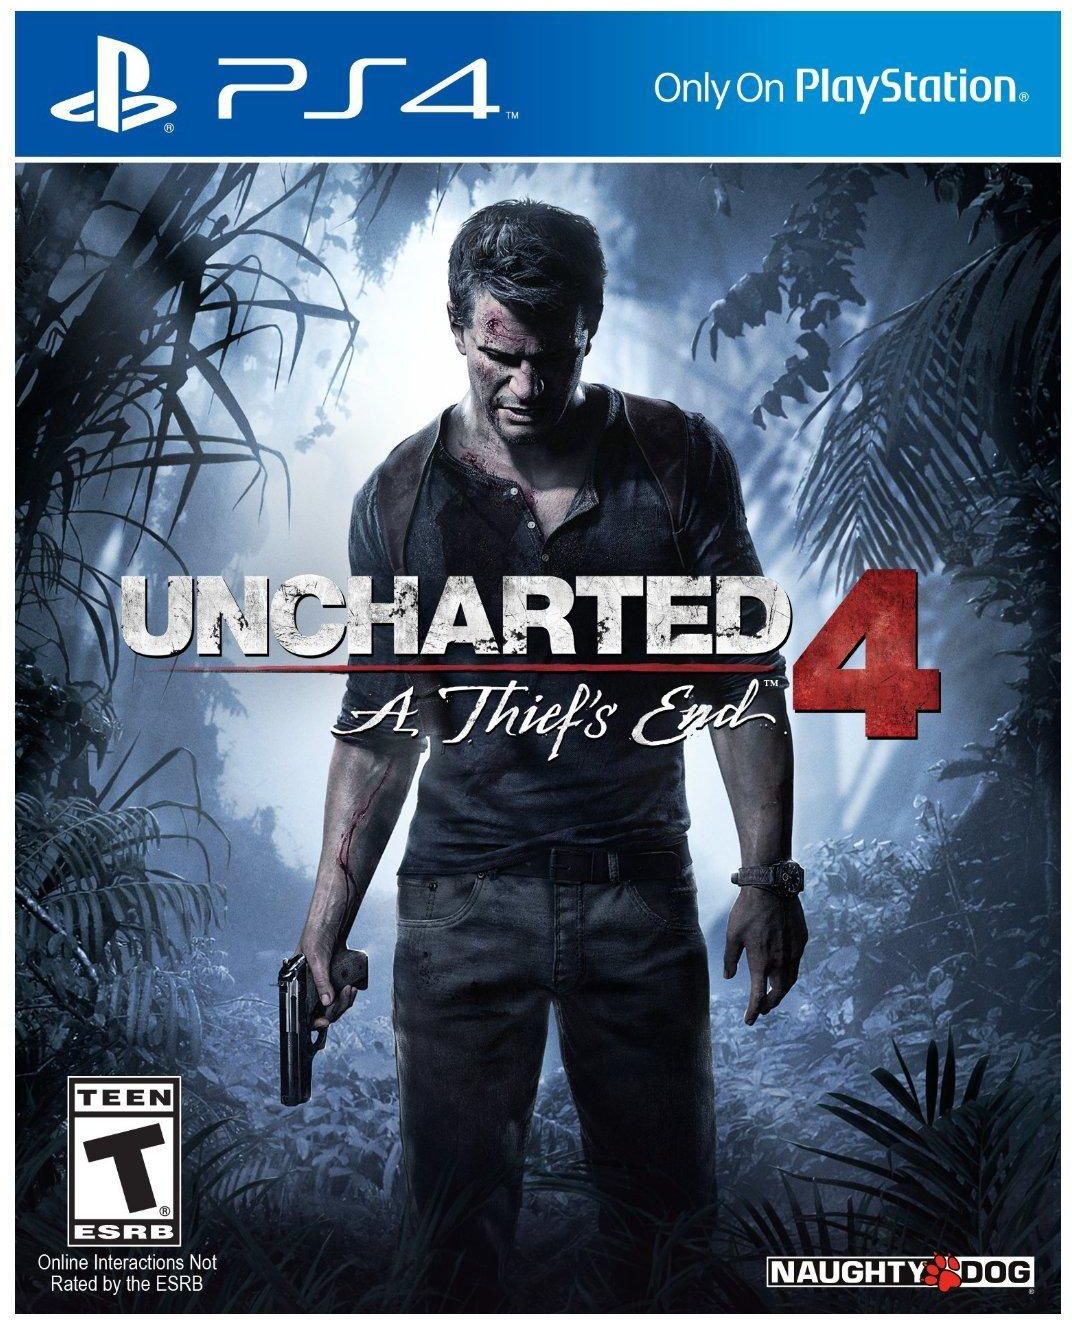 Uncharted 4: A Thief's End for PlayStation 4